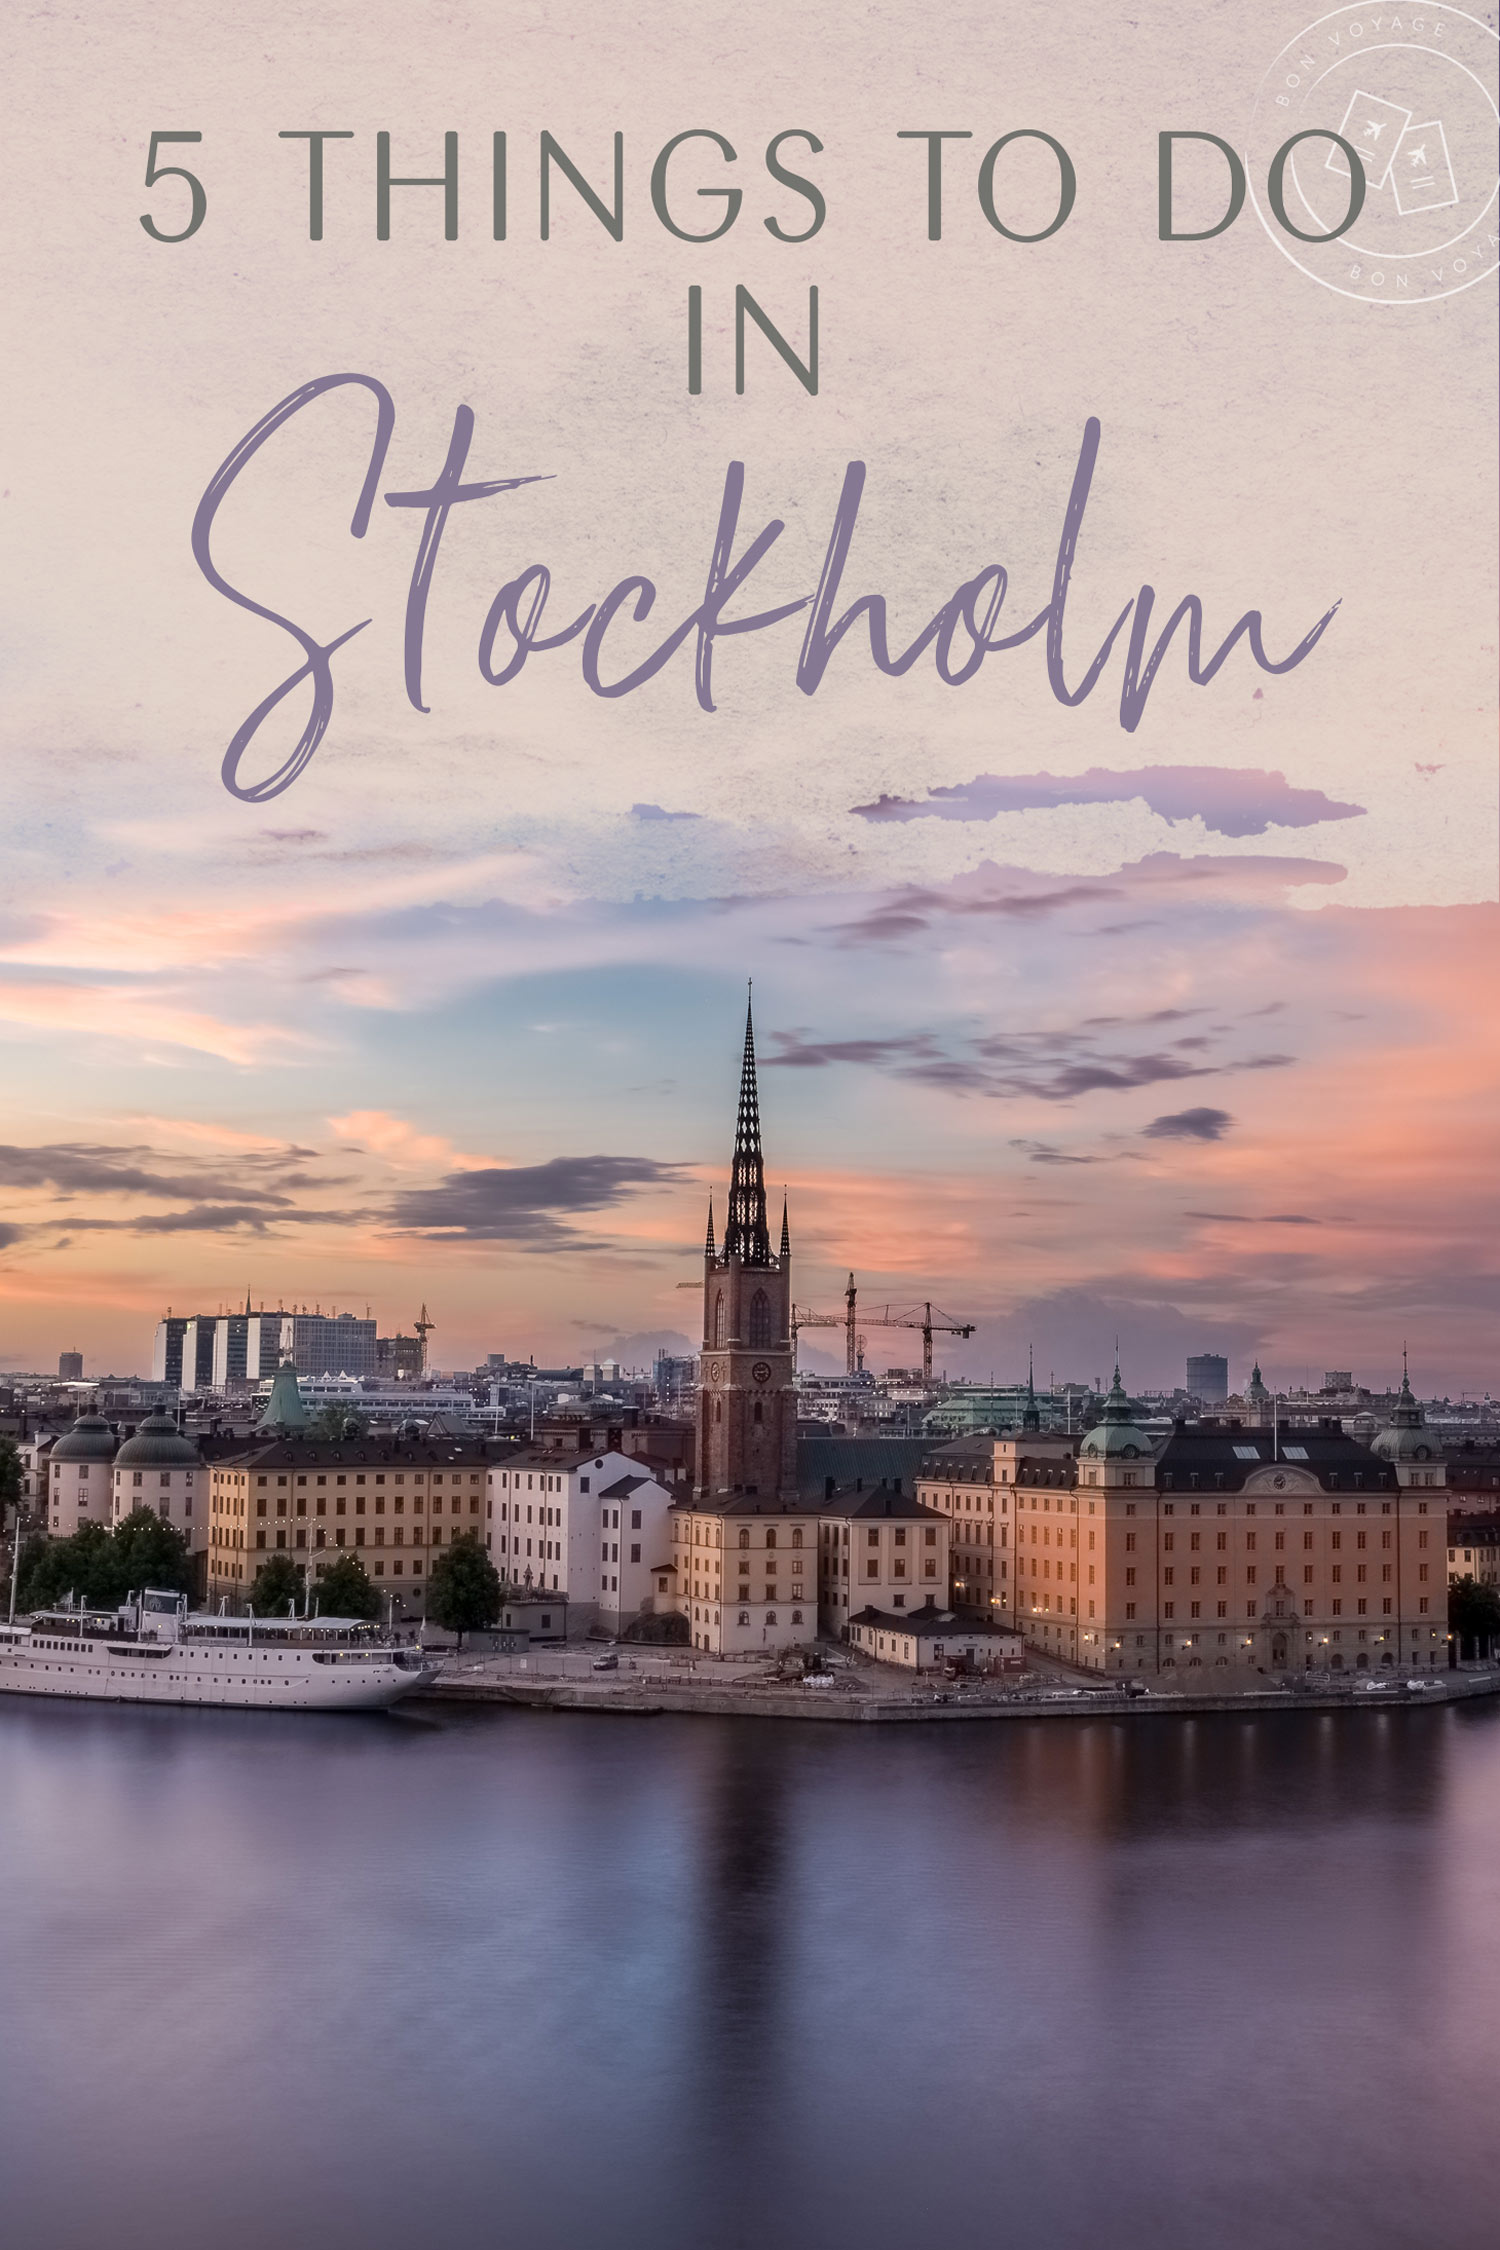 5 things to do in Stockholm